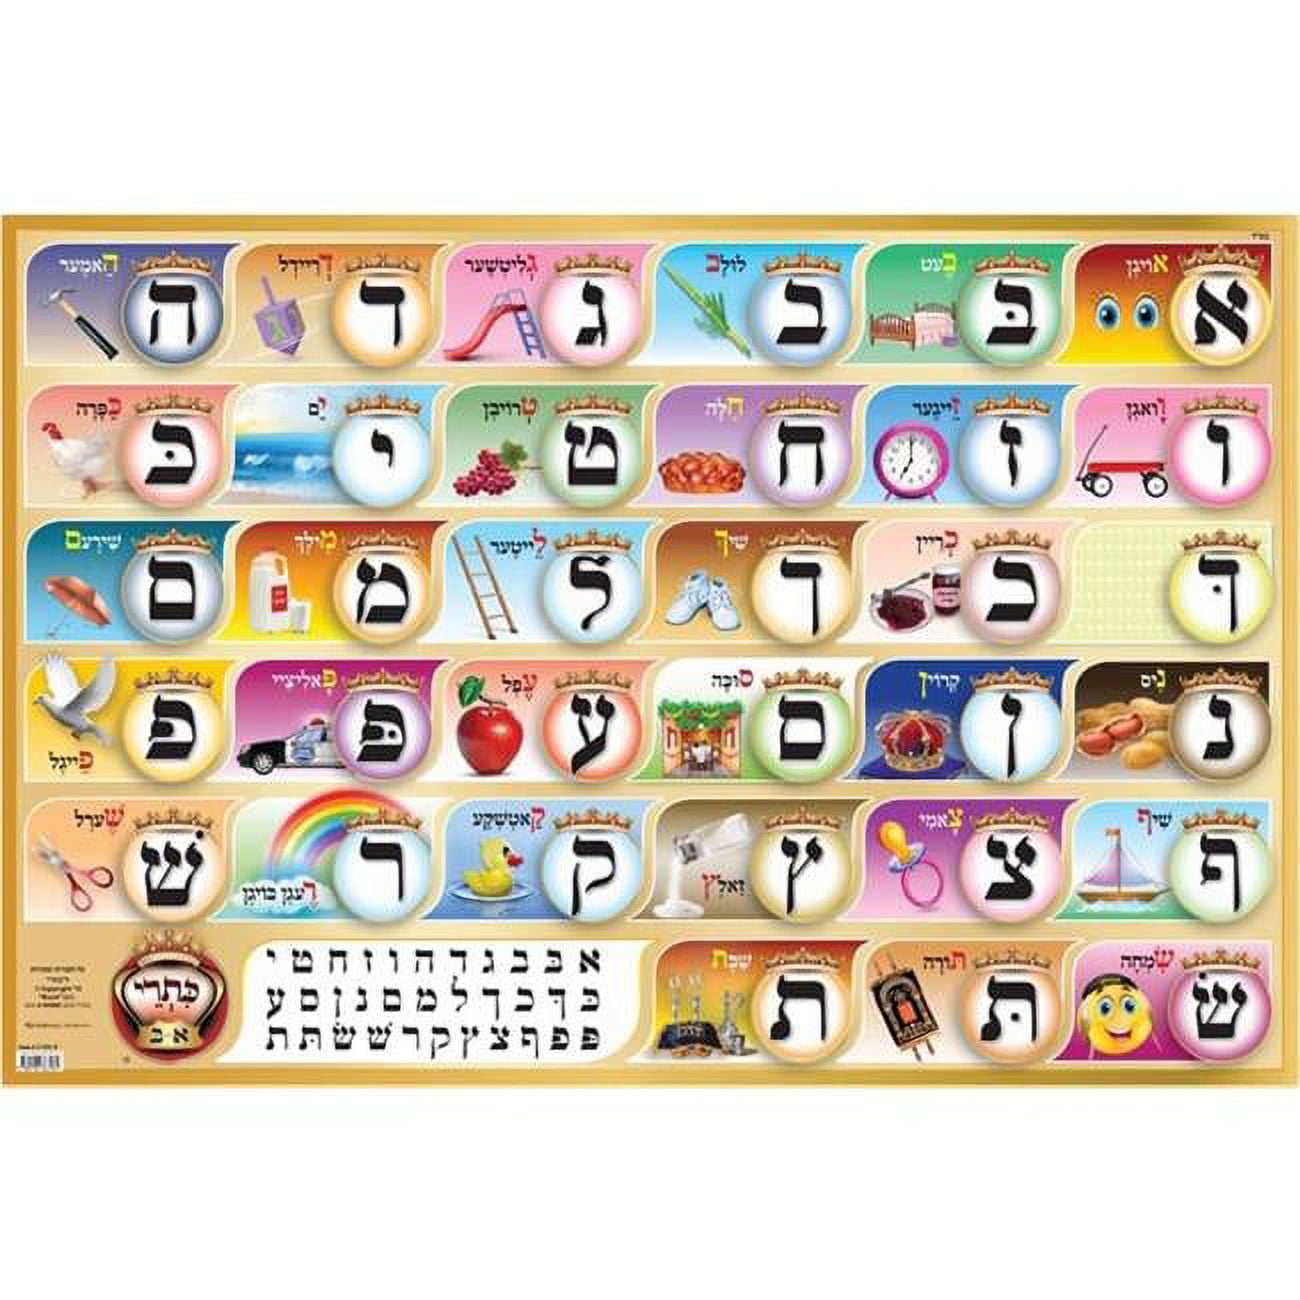 ISBN 9781943453115 product image for SSYD1B 13 x 19 in. Small Aleph Beth Educational Poster - Yiddish with Pictures | upcitemdb.com